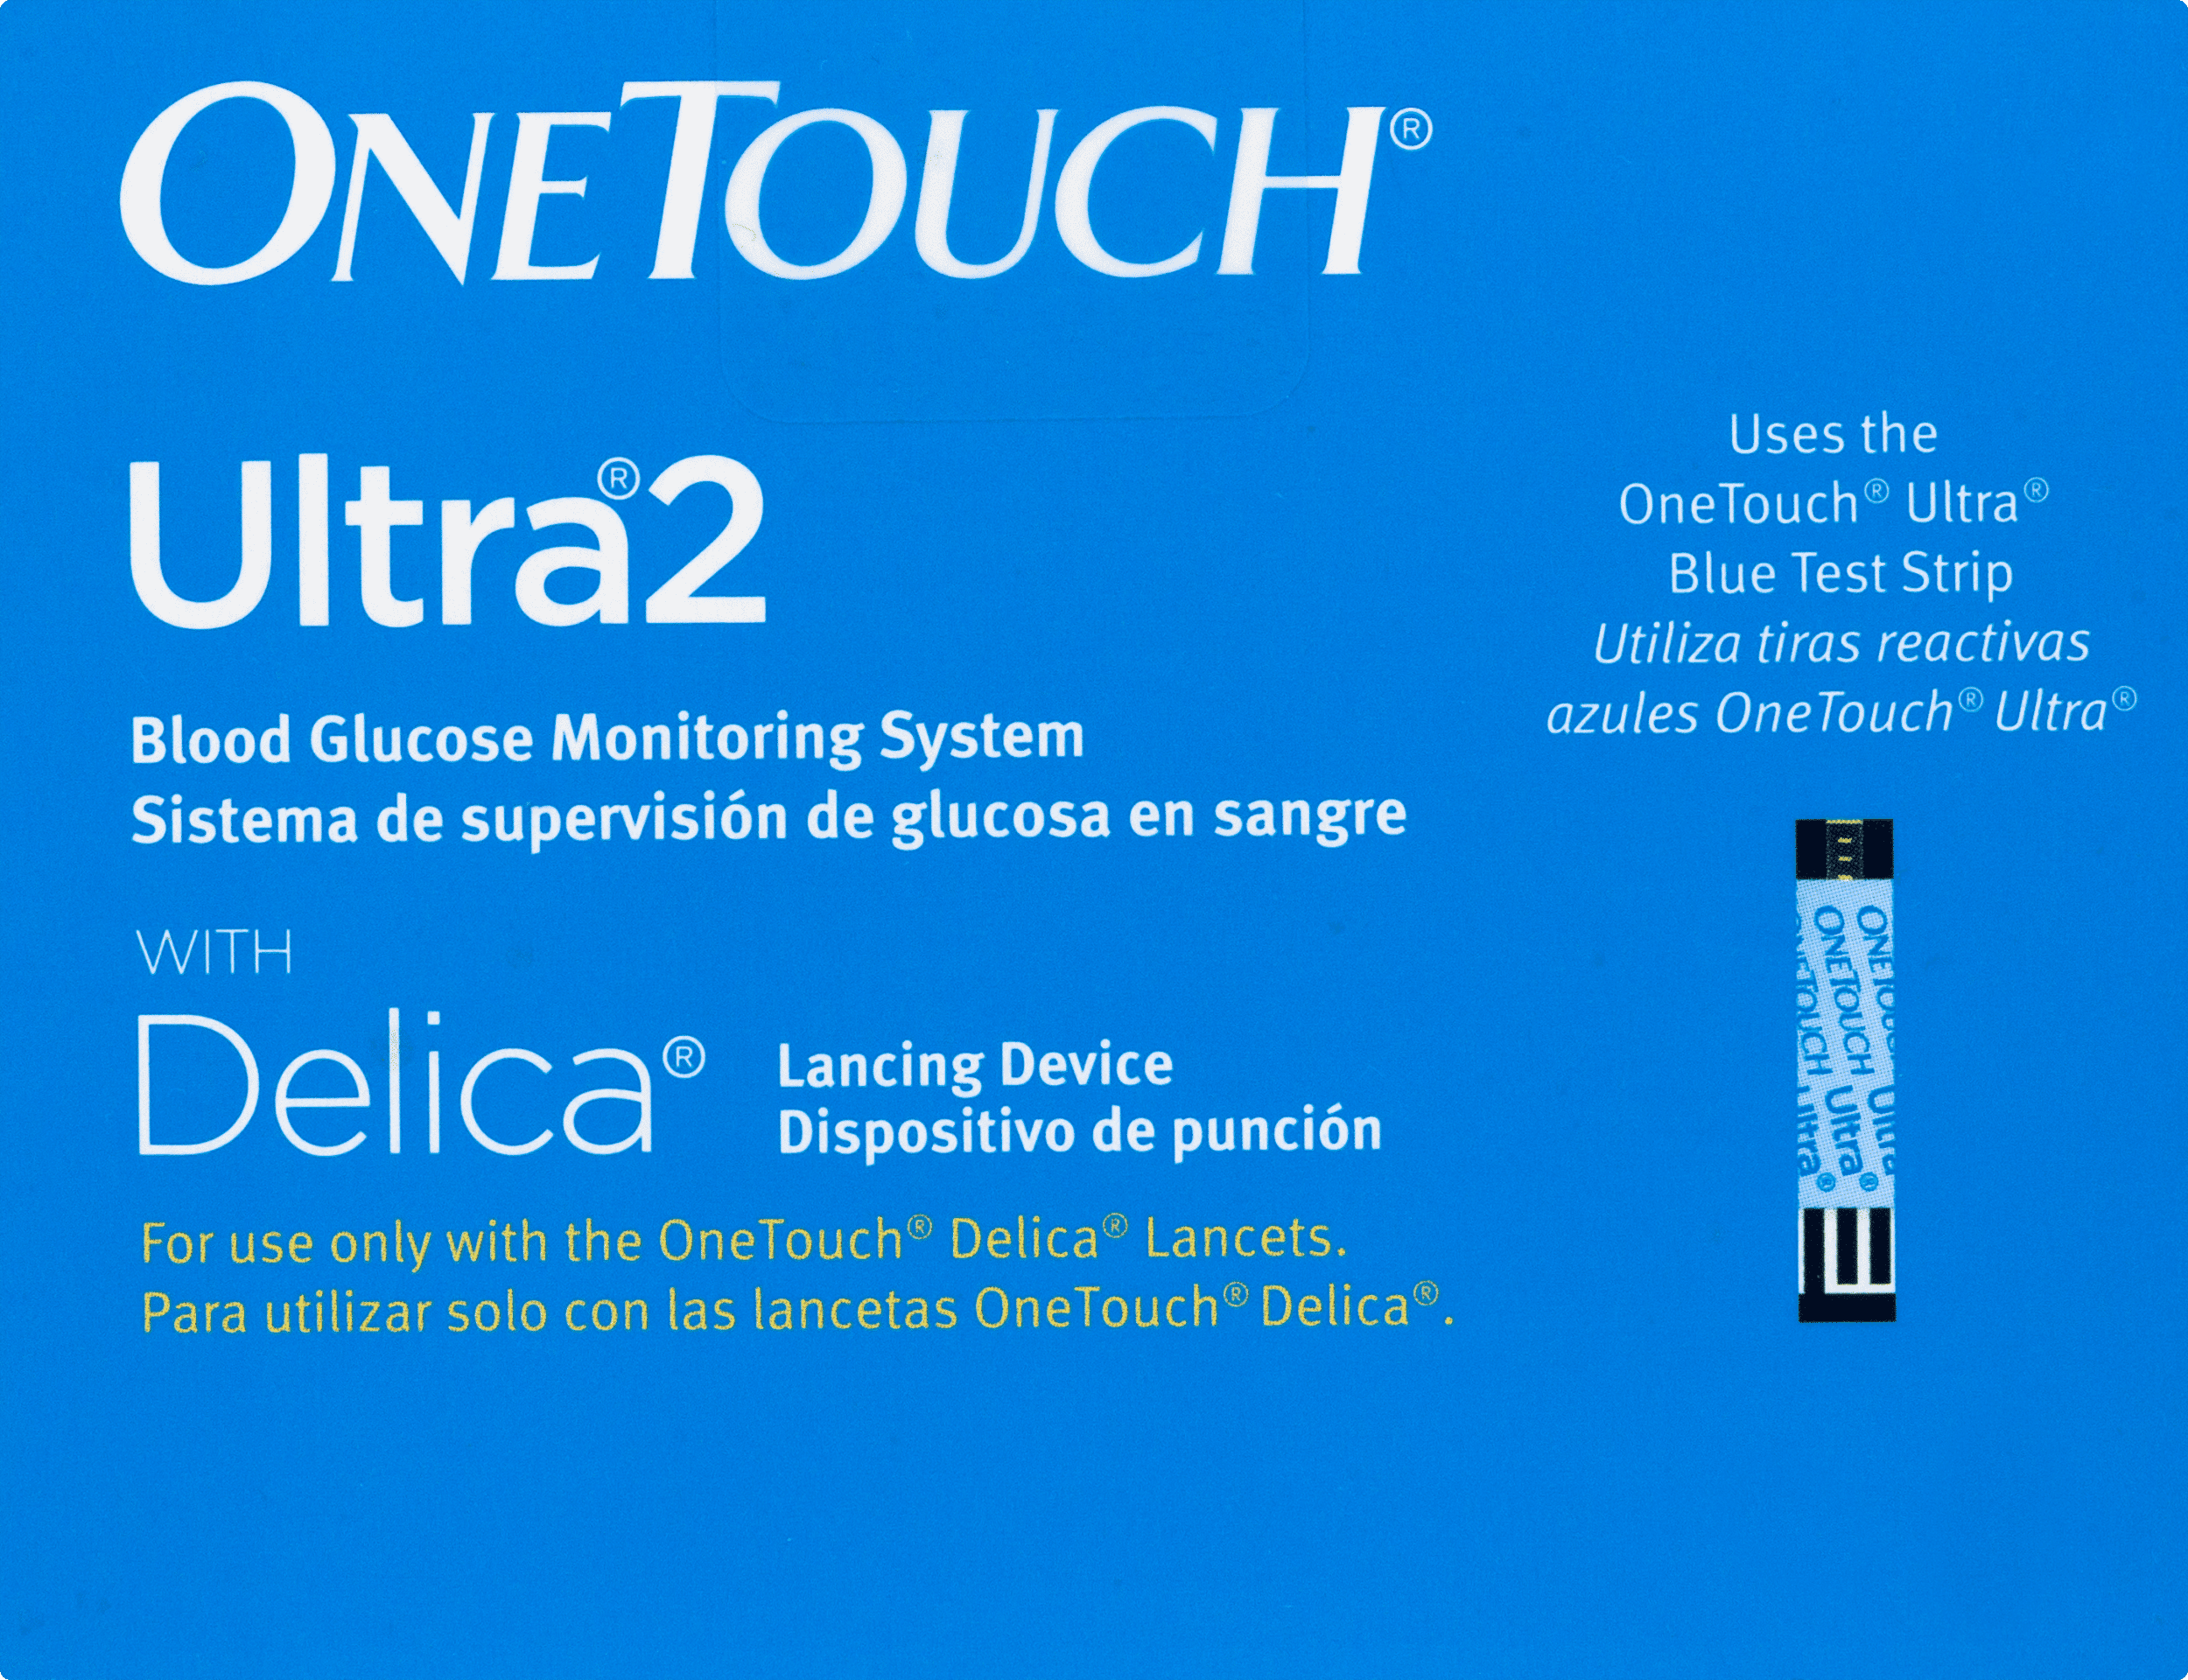 What are the main benefits of the OneTouch lancing devices?